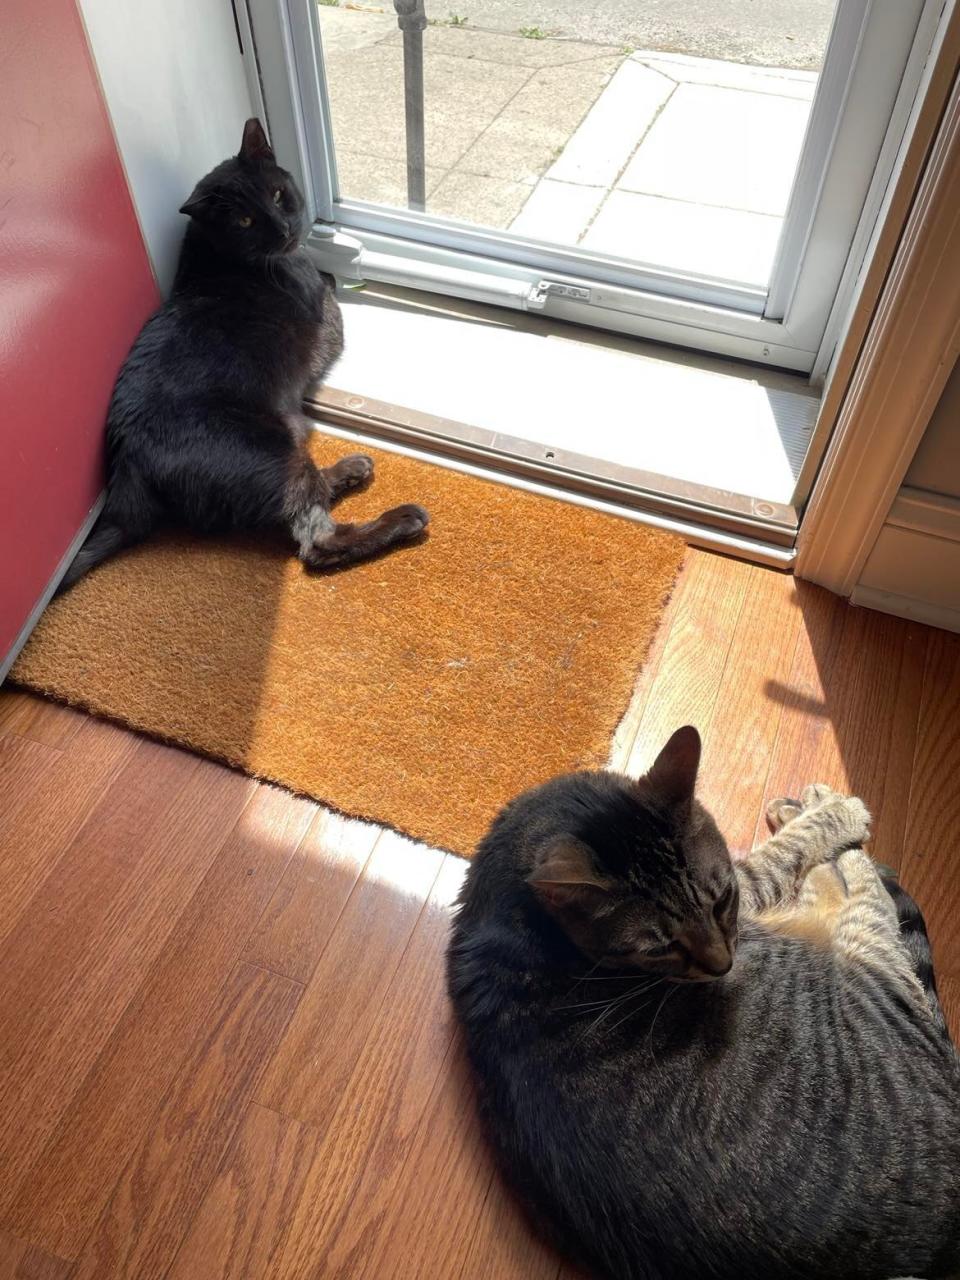 Buddy lounges around a home with his new friend Teddy after being brutally attacked by two dogs. (Pennsylvania SPCA)